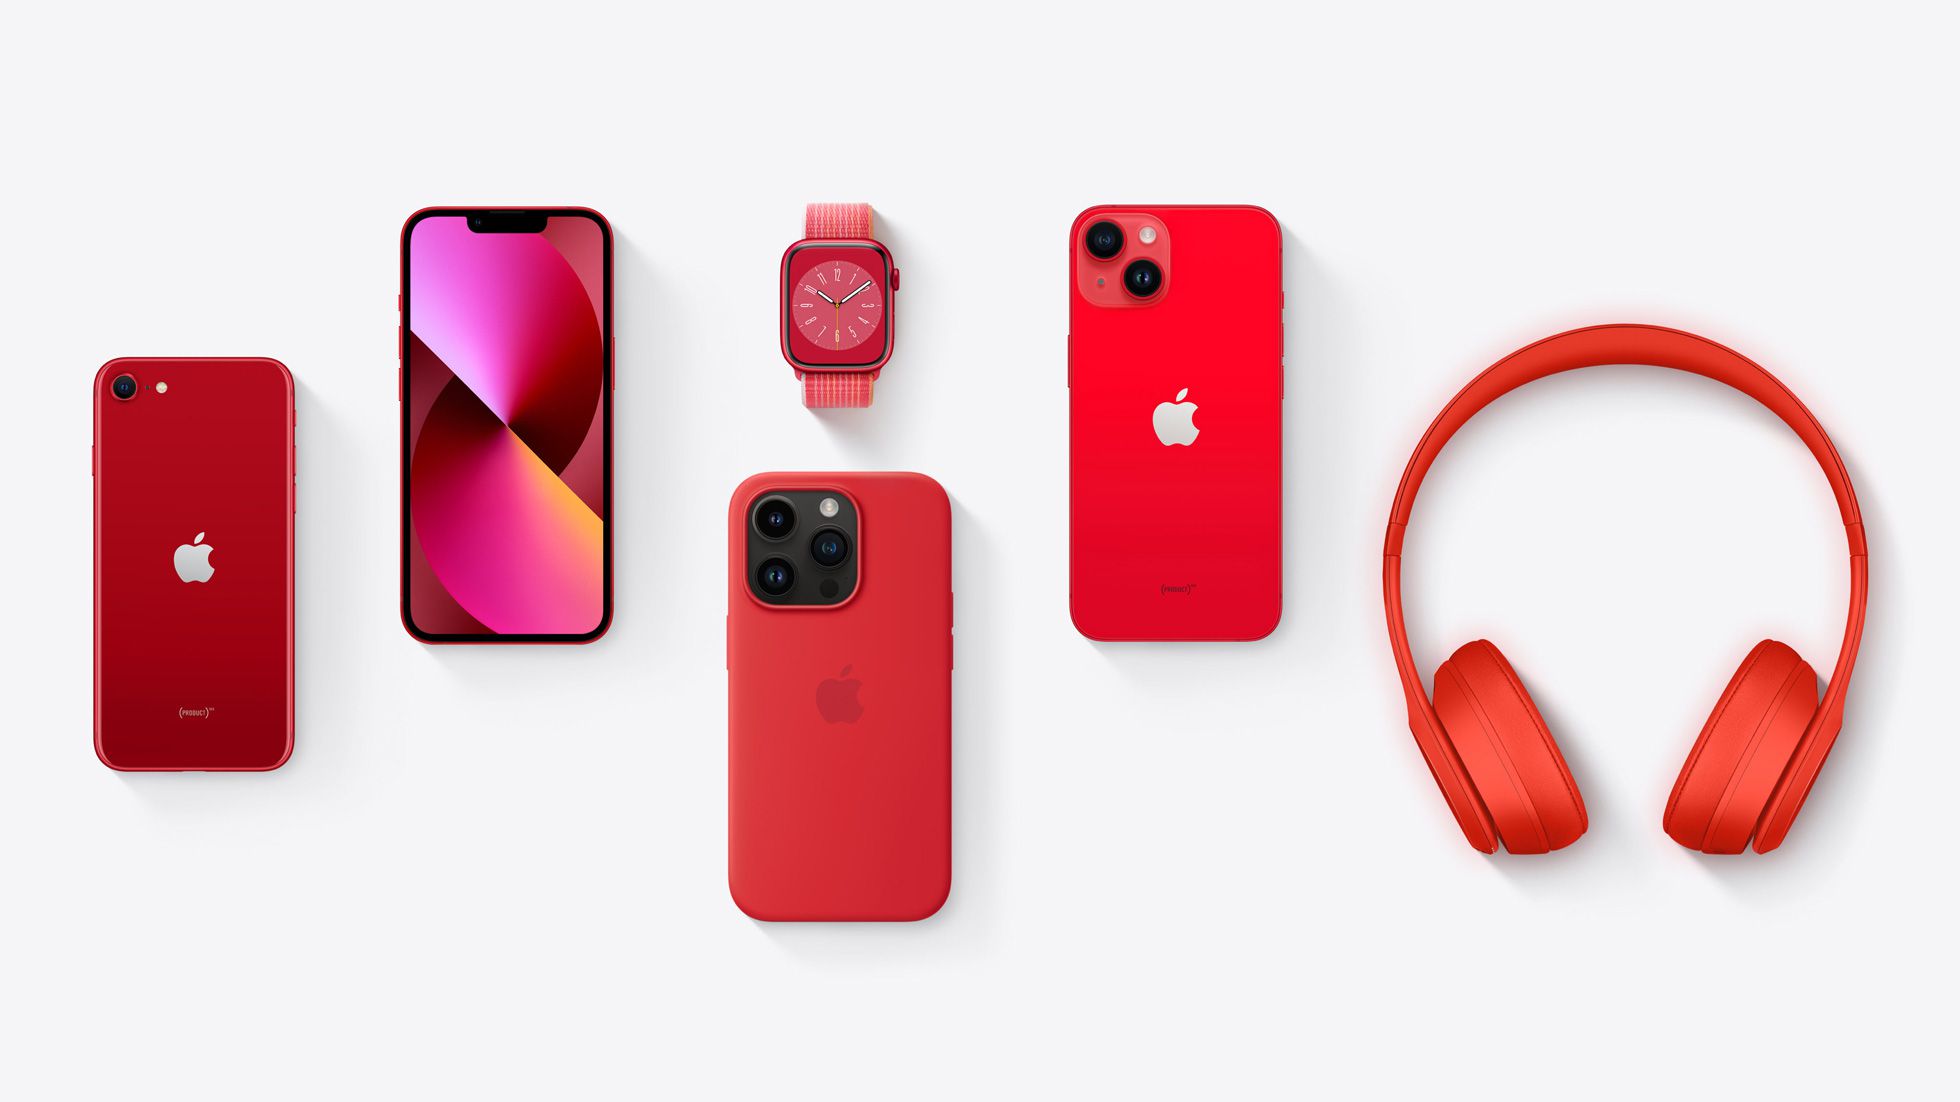 Apple Highlights Partnership With (RED) For World AIDS Day